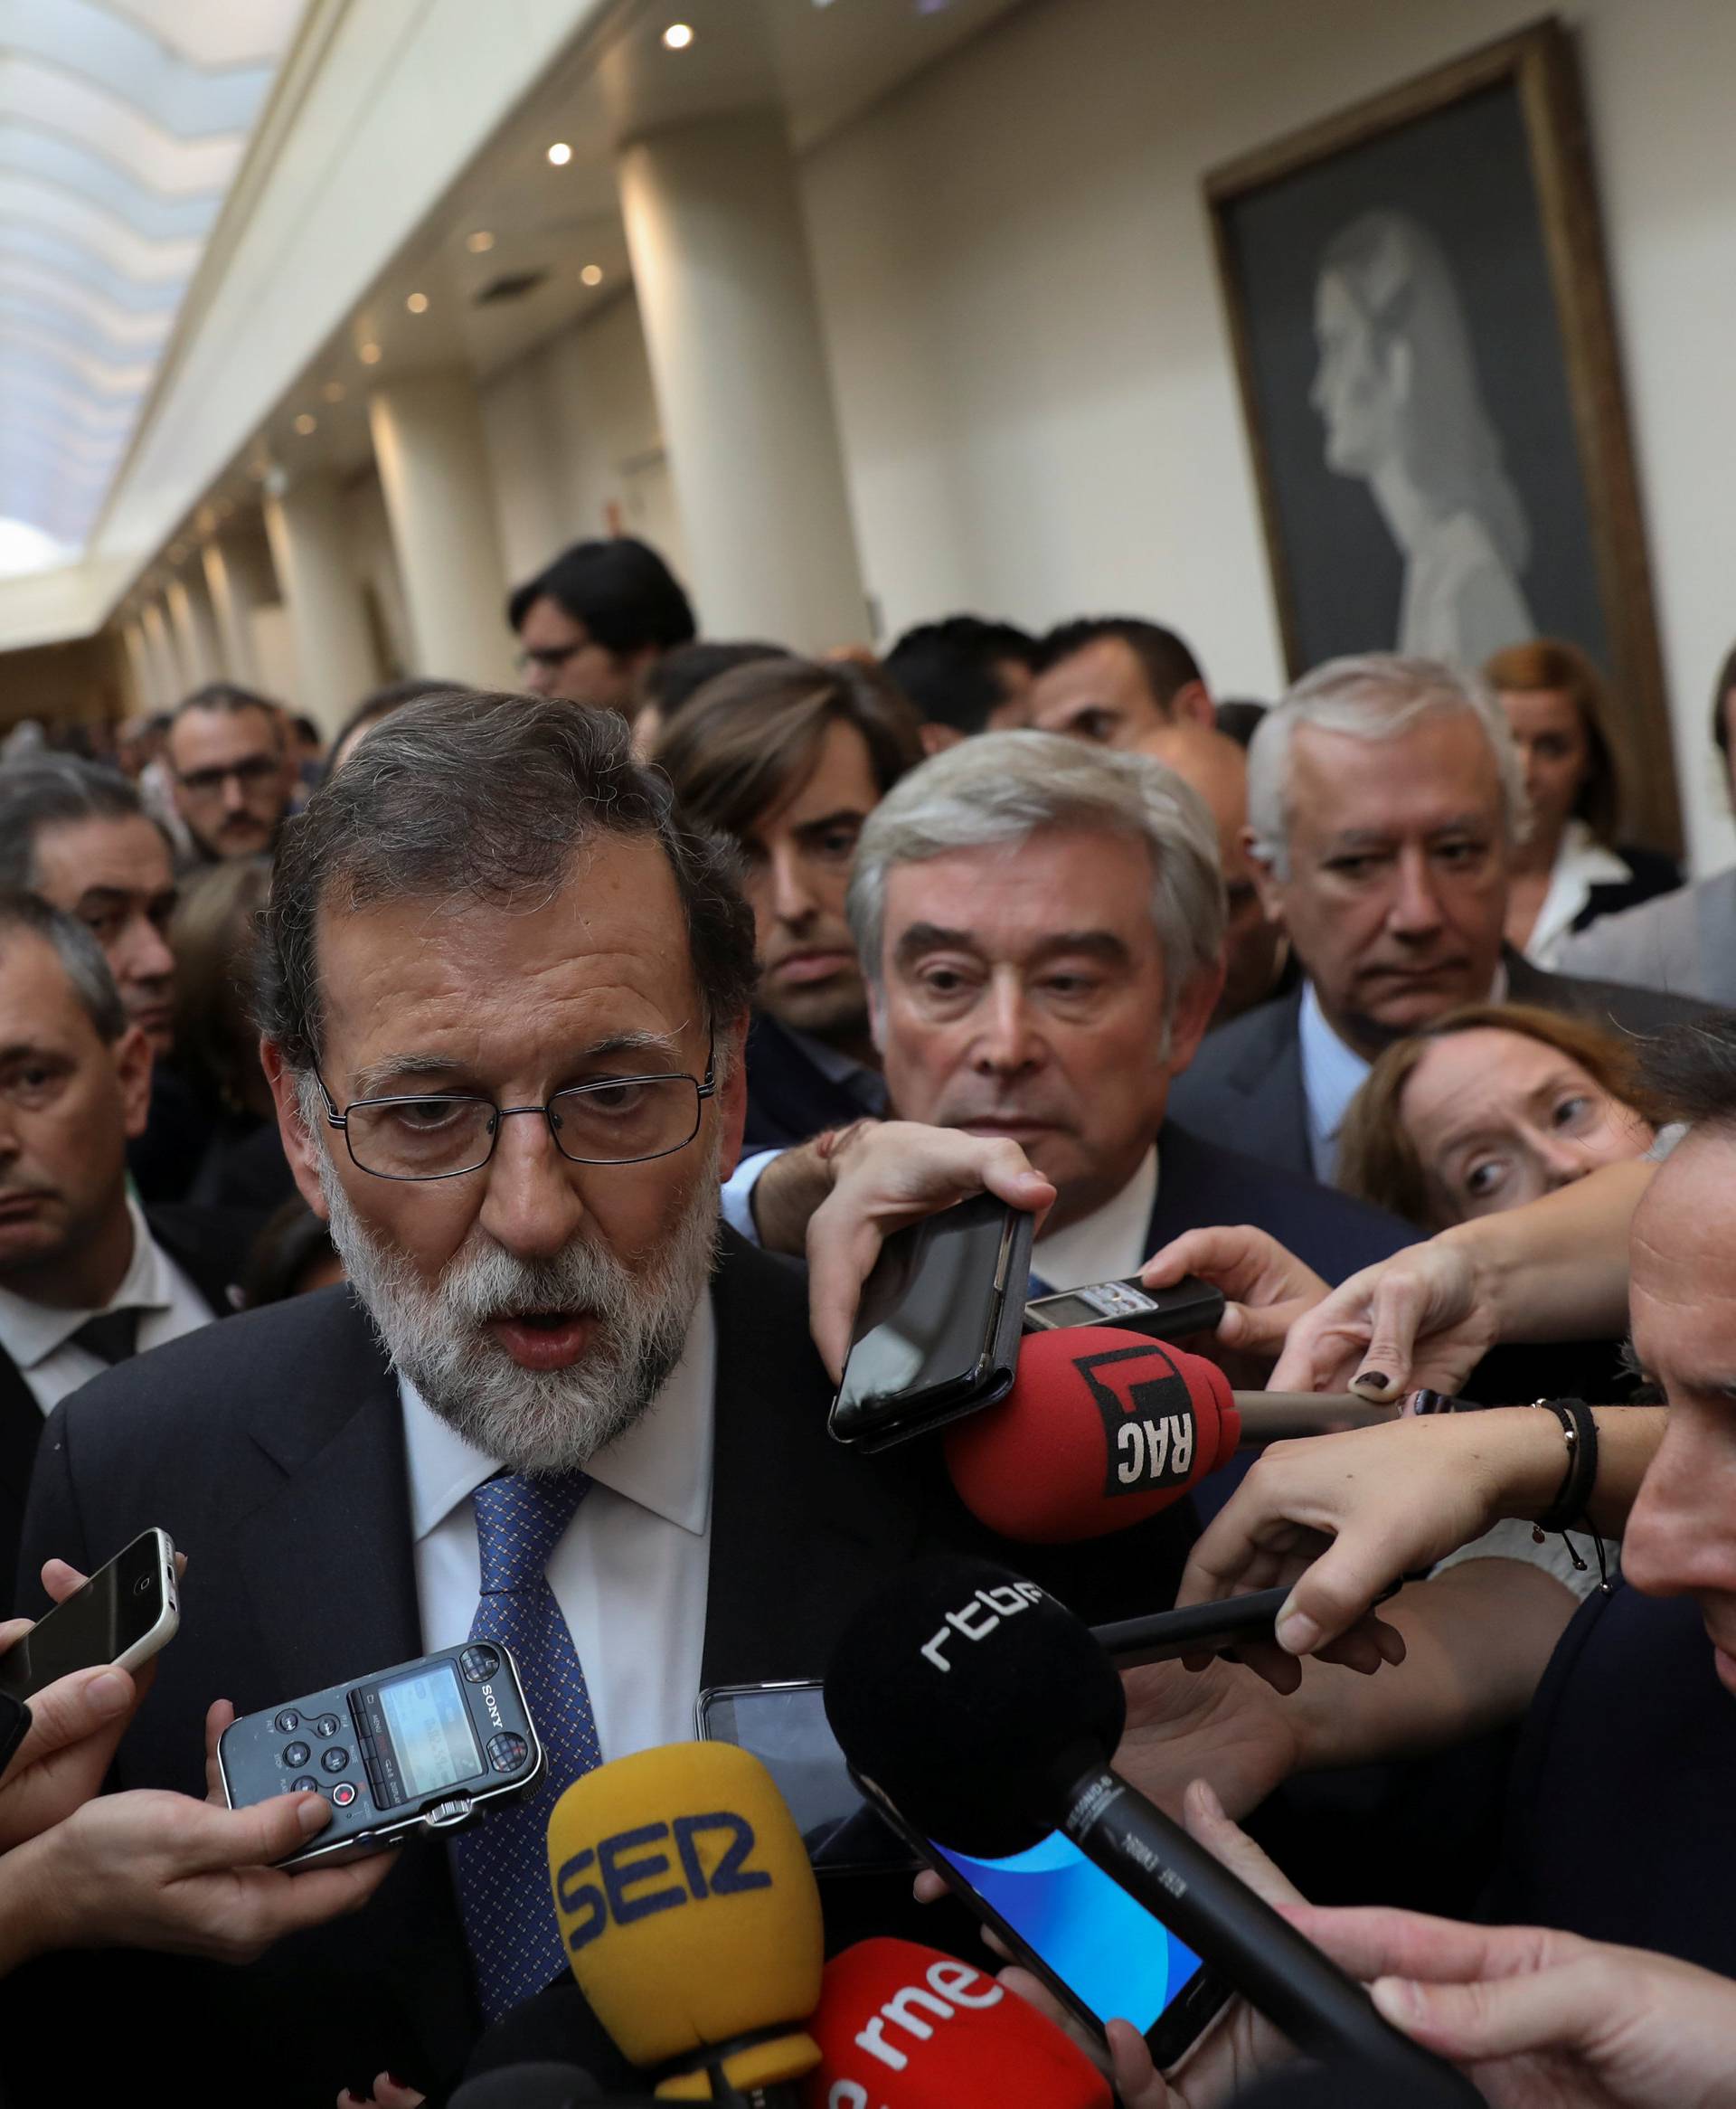 Spain's PM Rajoy talks to reportes after a plenary session at the upper house Senate in Madrid